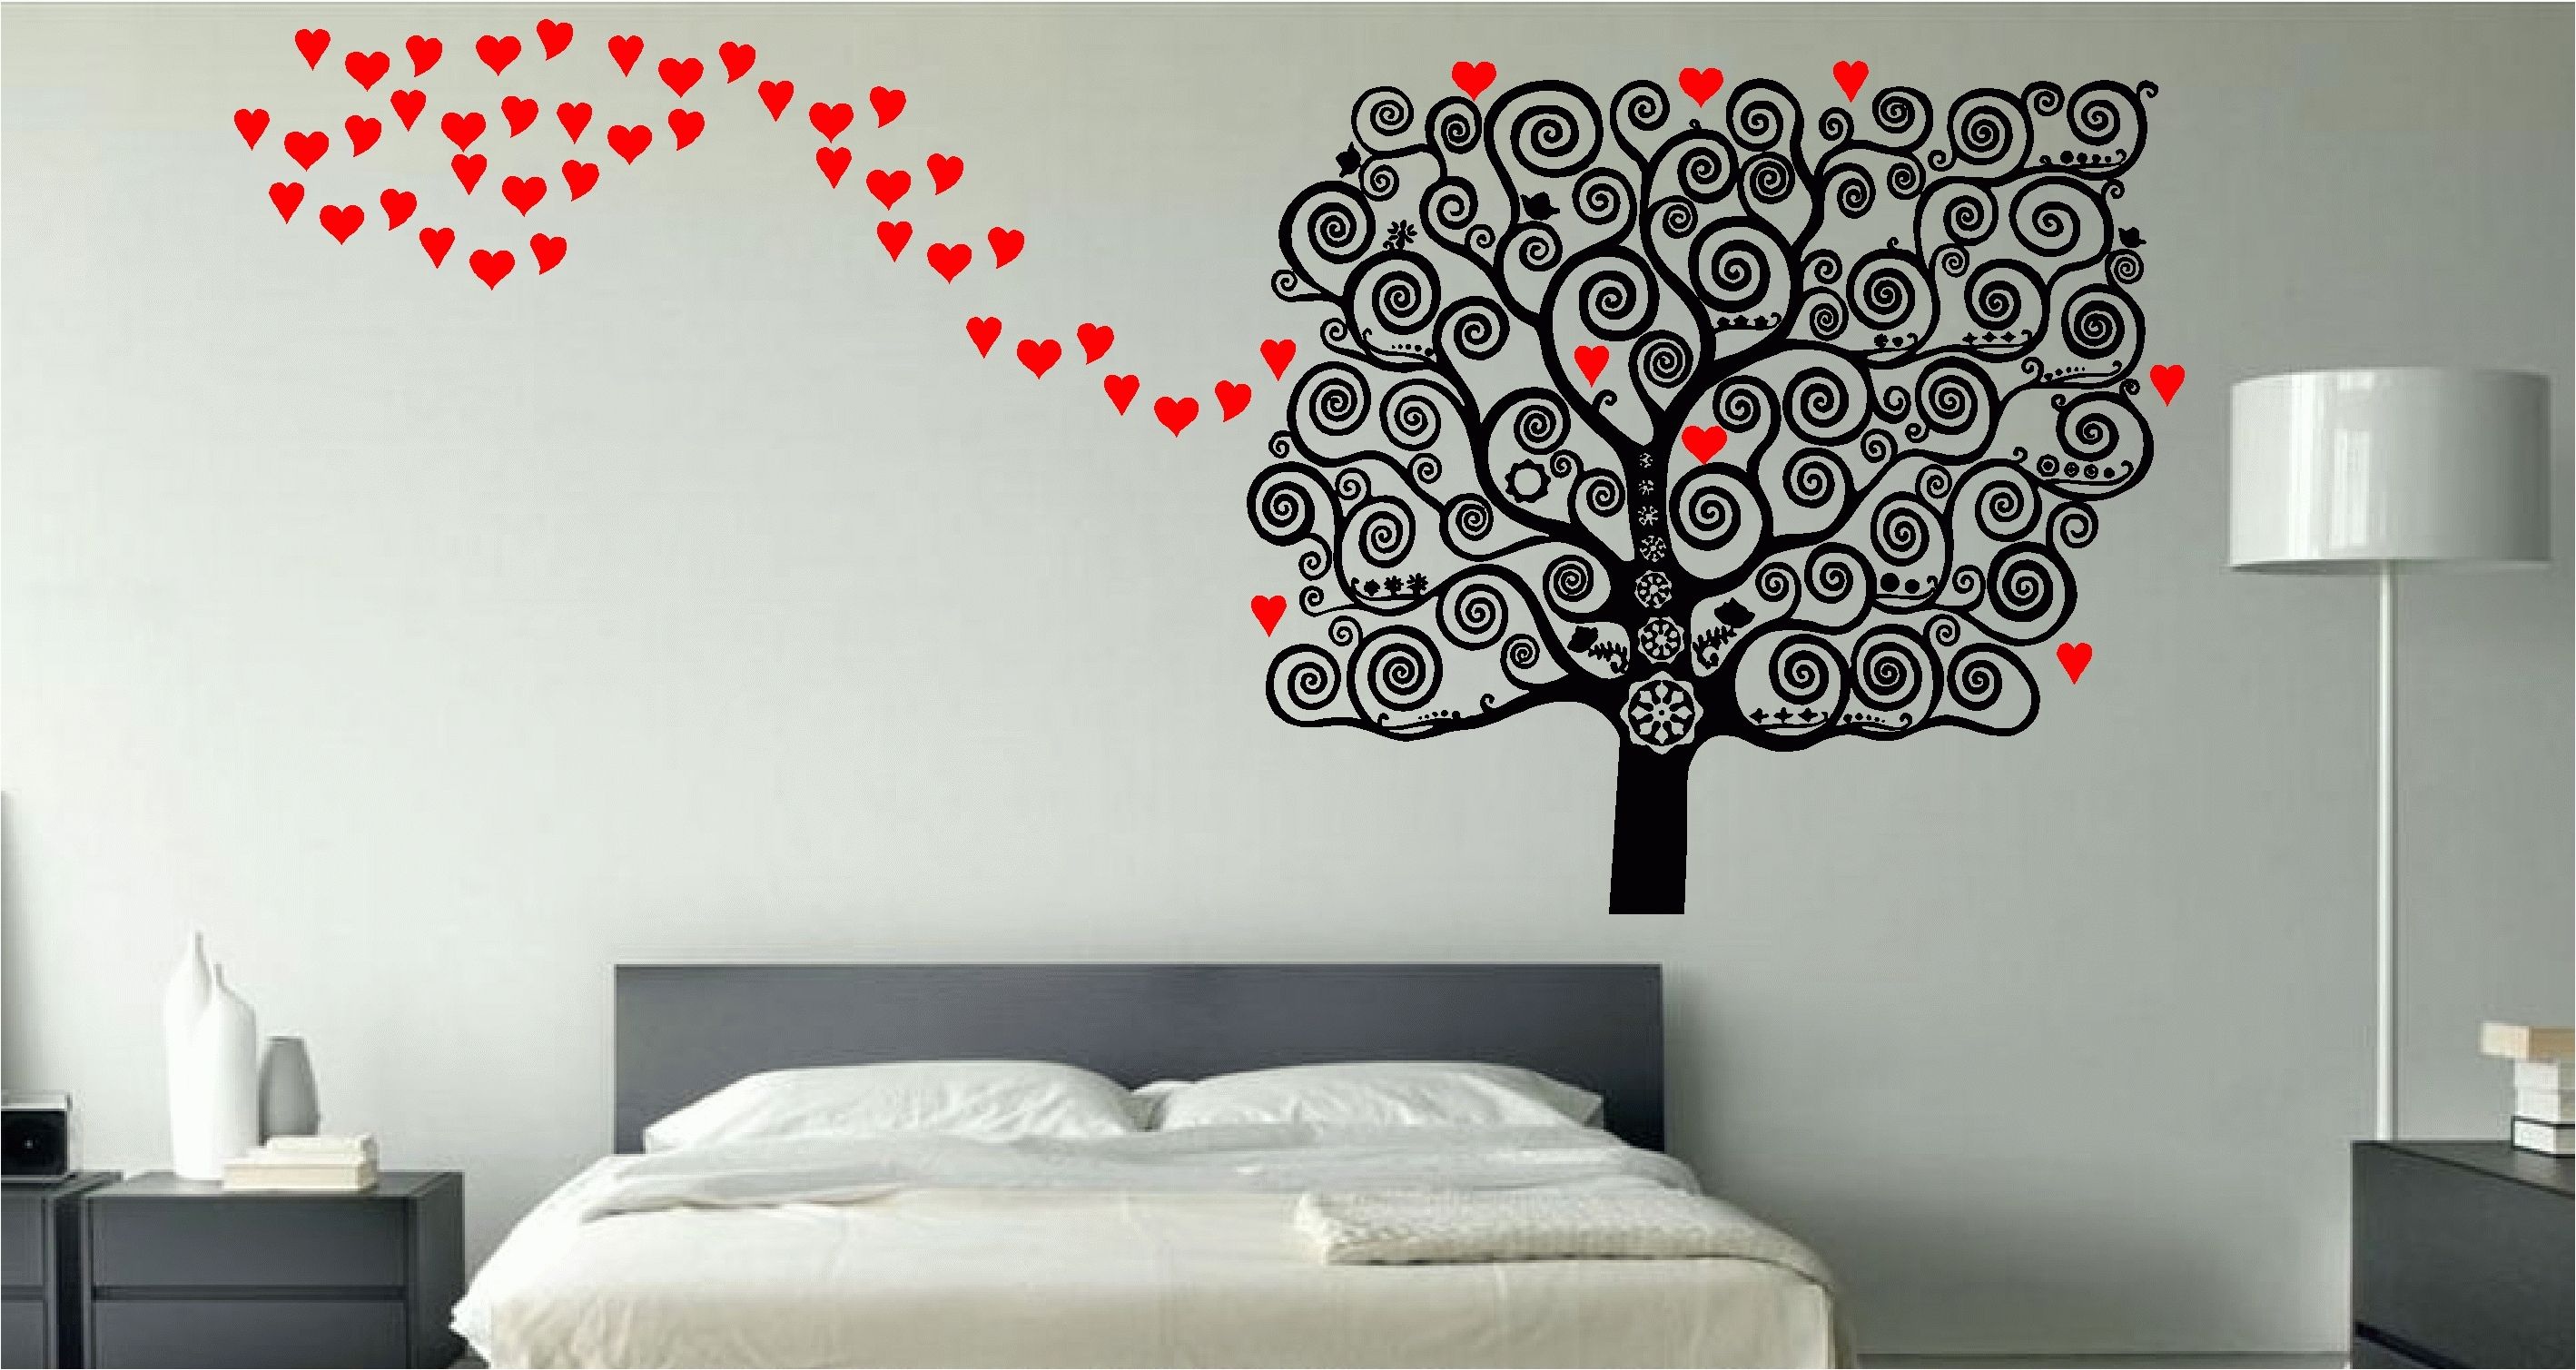 Most Current Wall Art For Bedroom With Regard To Stunning Love Heart Tree Wall Art Sticker Decal Bedroom Kitchen (Photo 2 of 15)